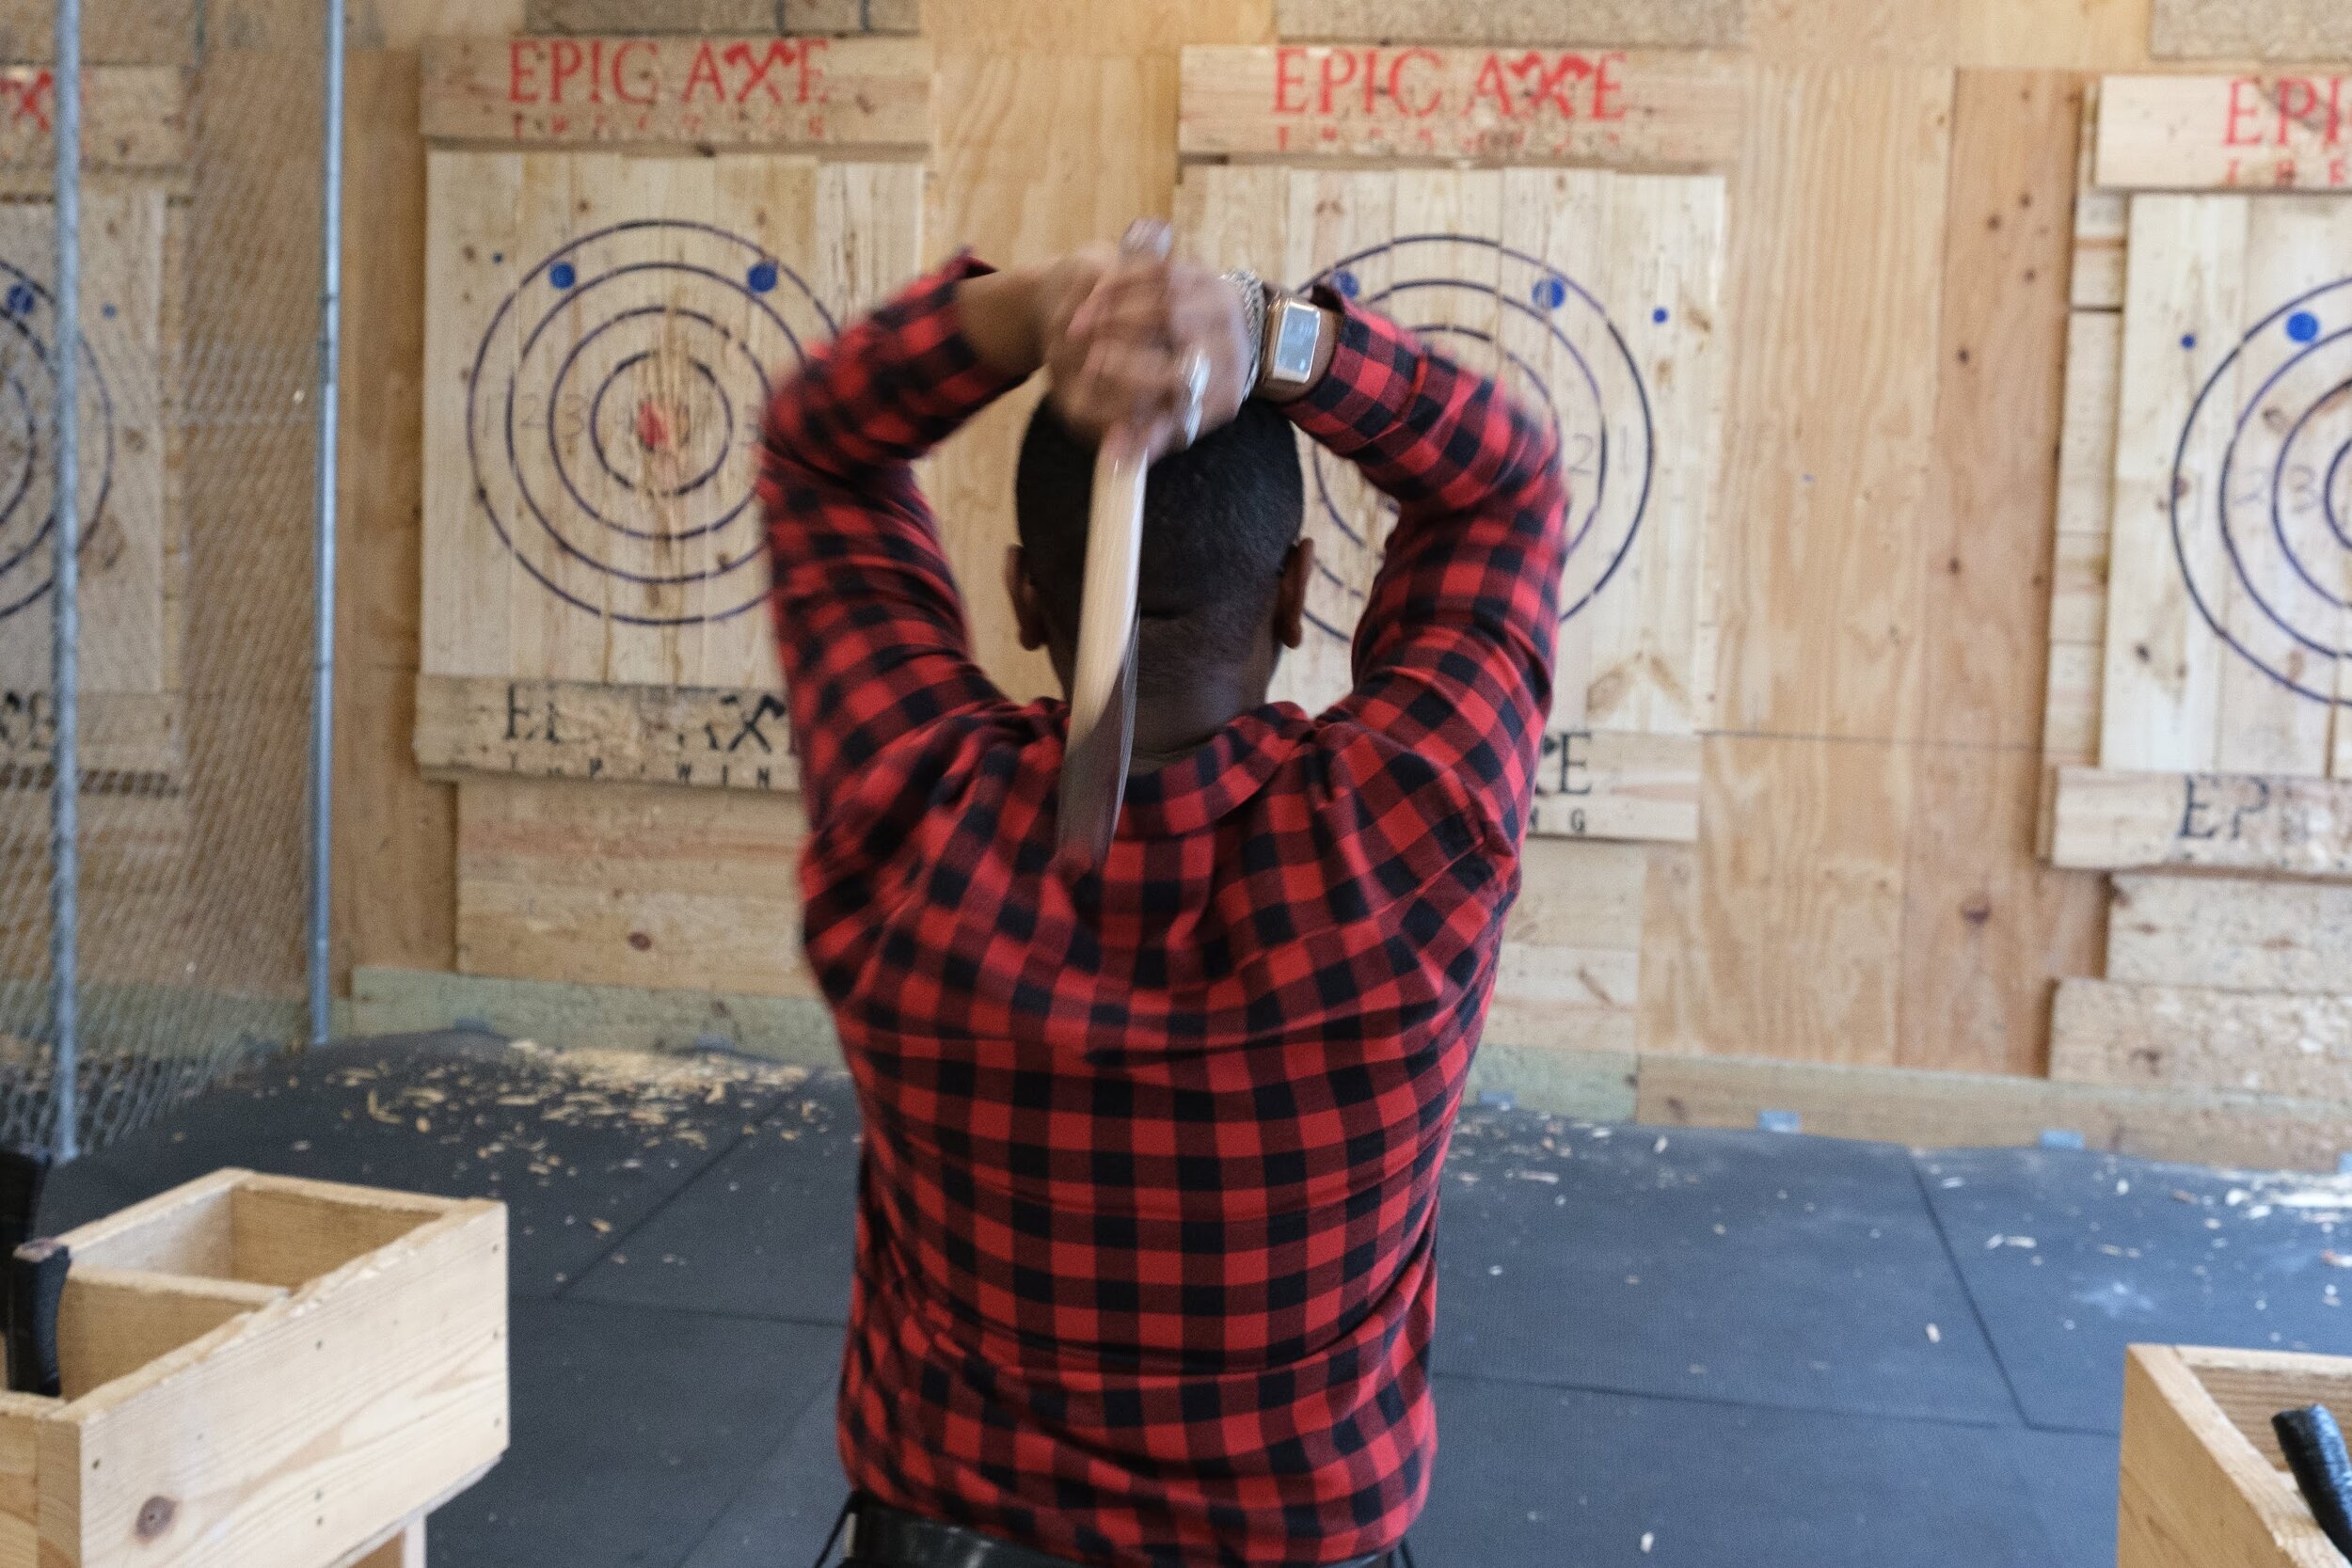 Sighthound axe throwing.